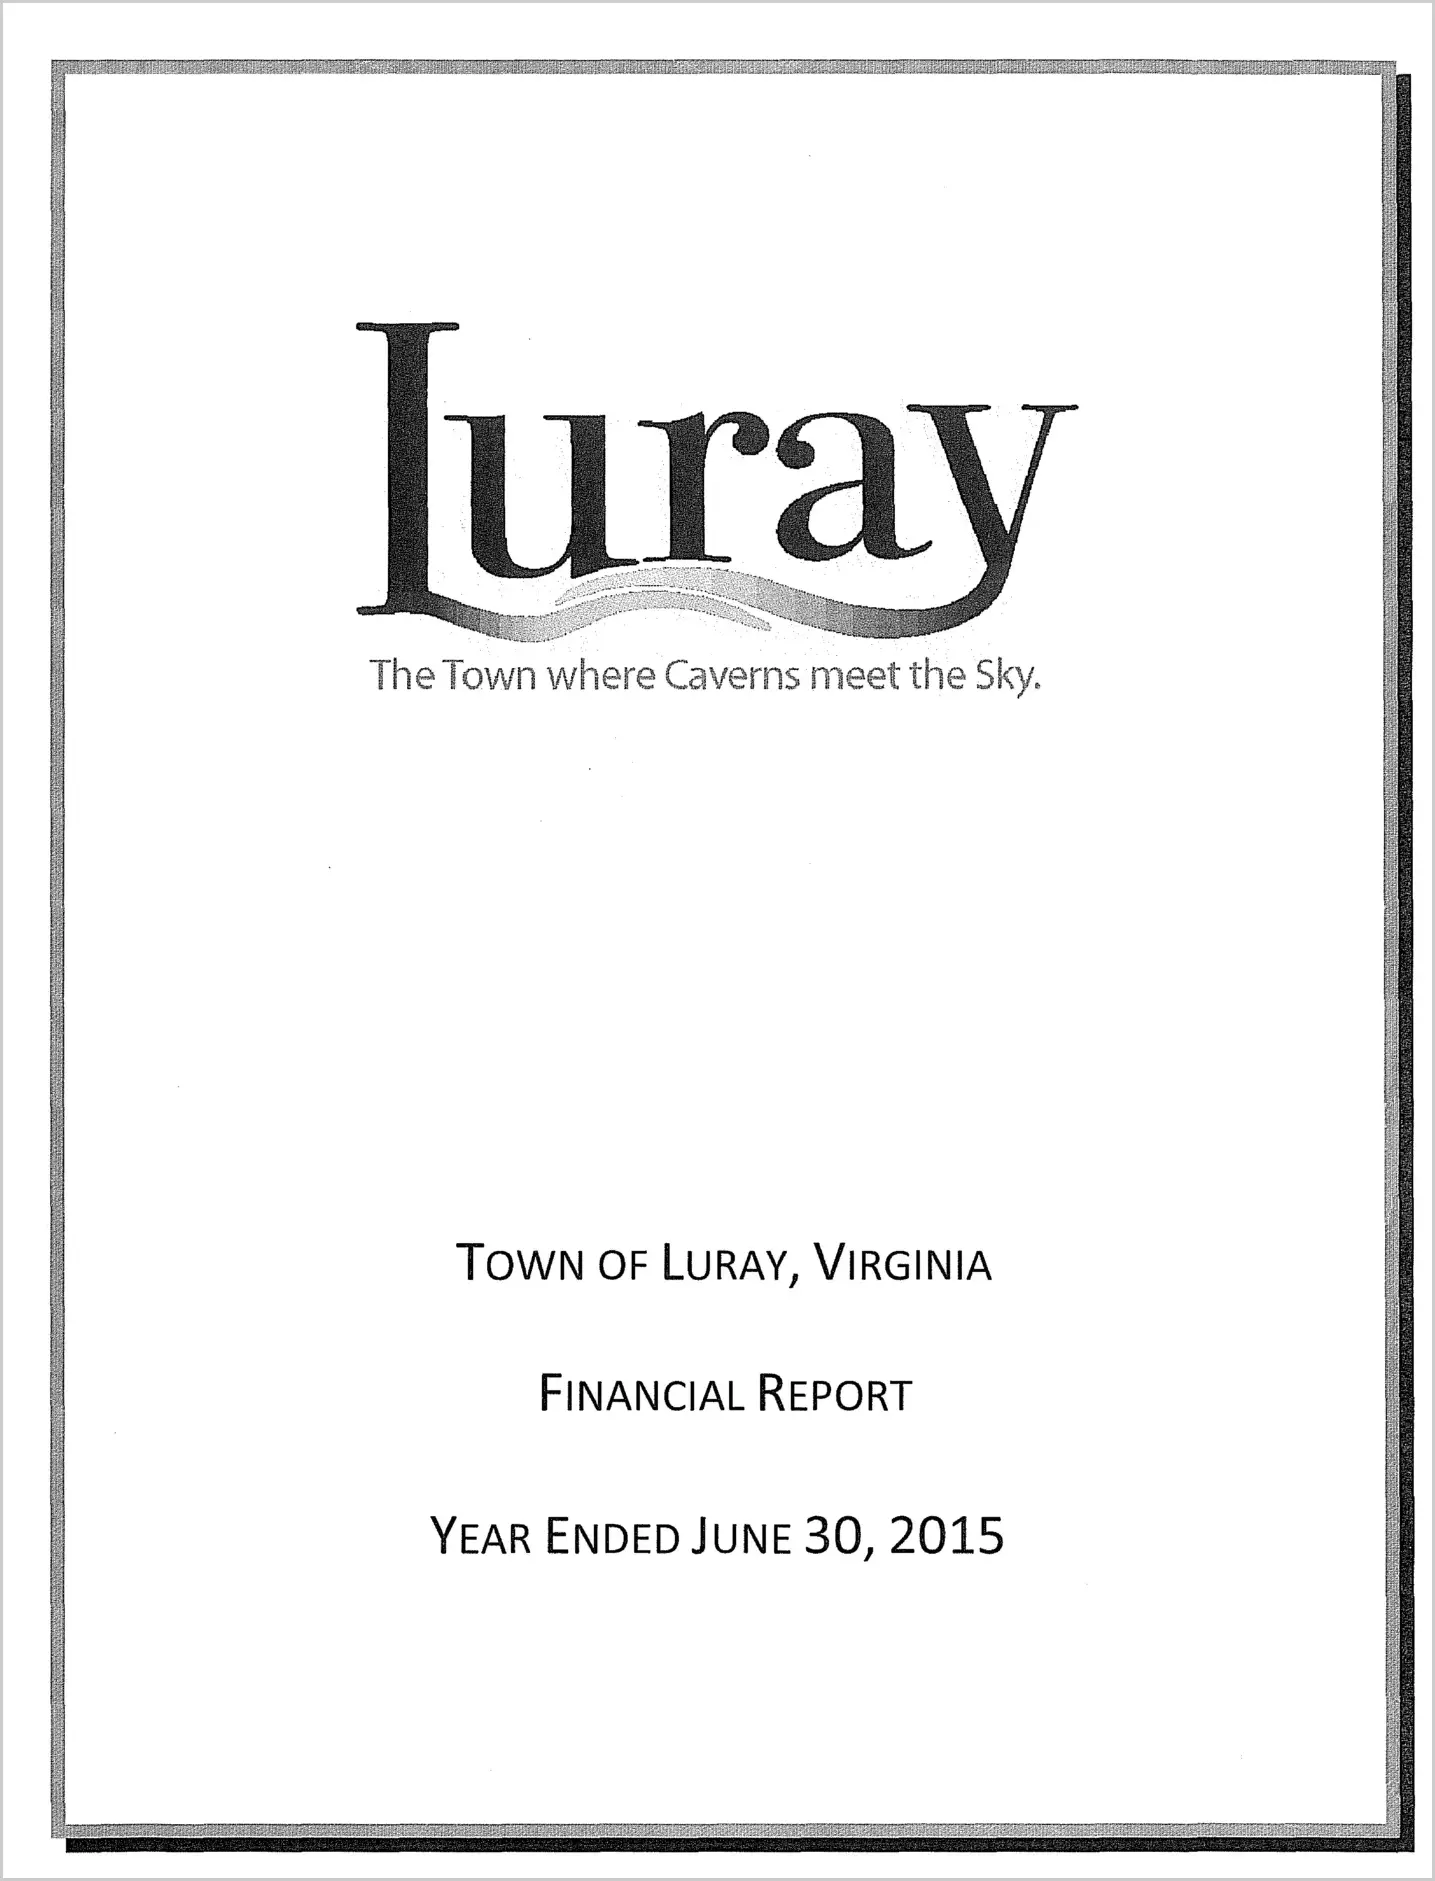 2015 Annual Financial Report for Town of Luray